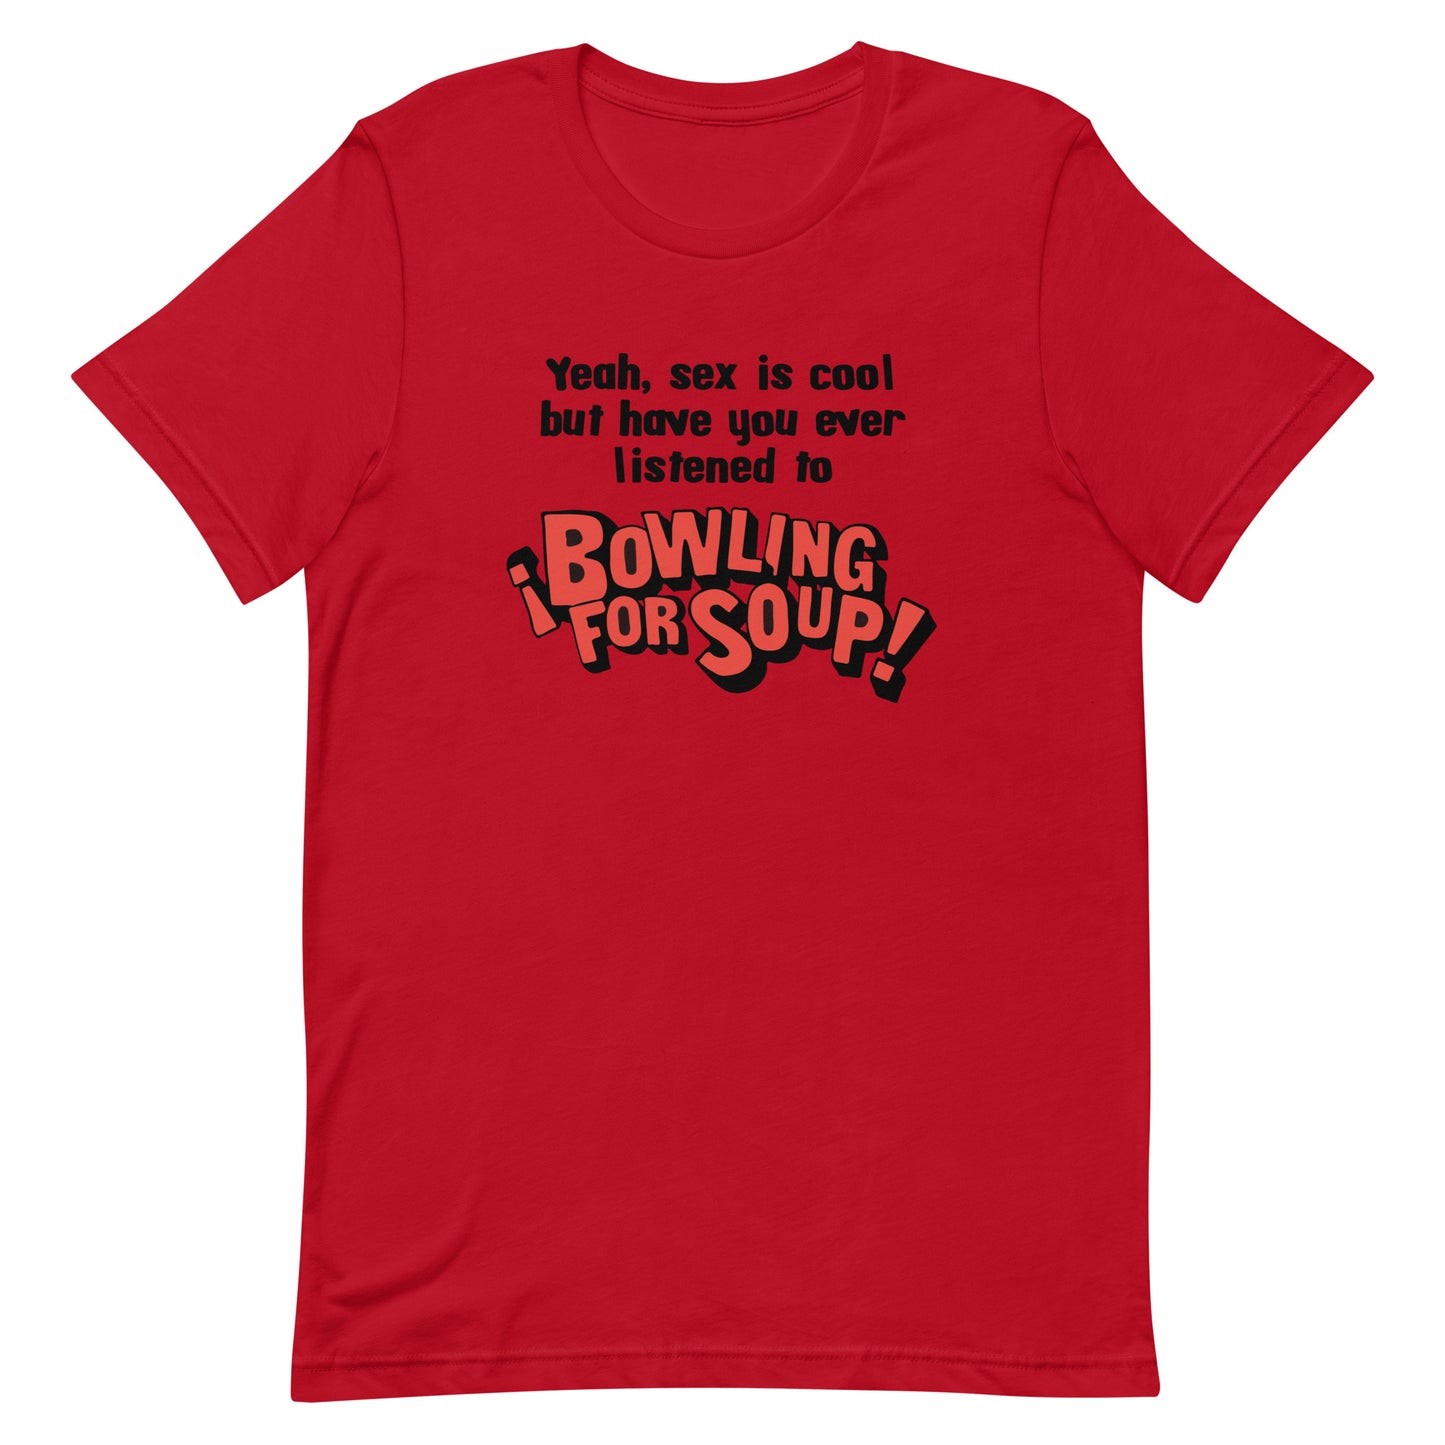 Have You Ever Listened to Bowling For Soup? Unisex t-shirt